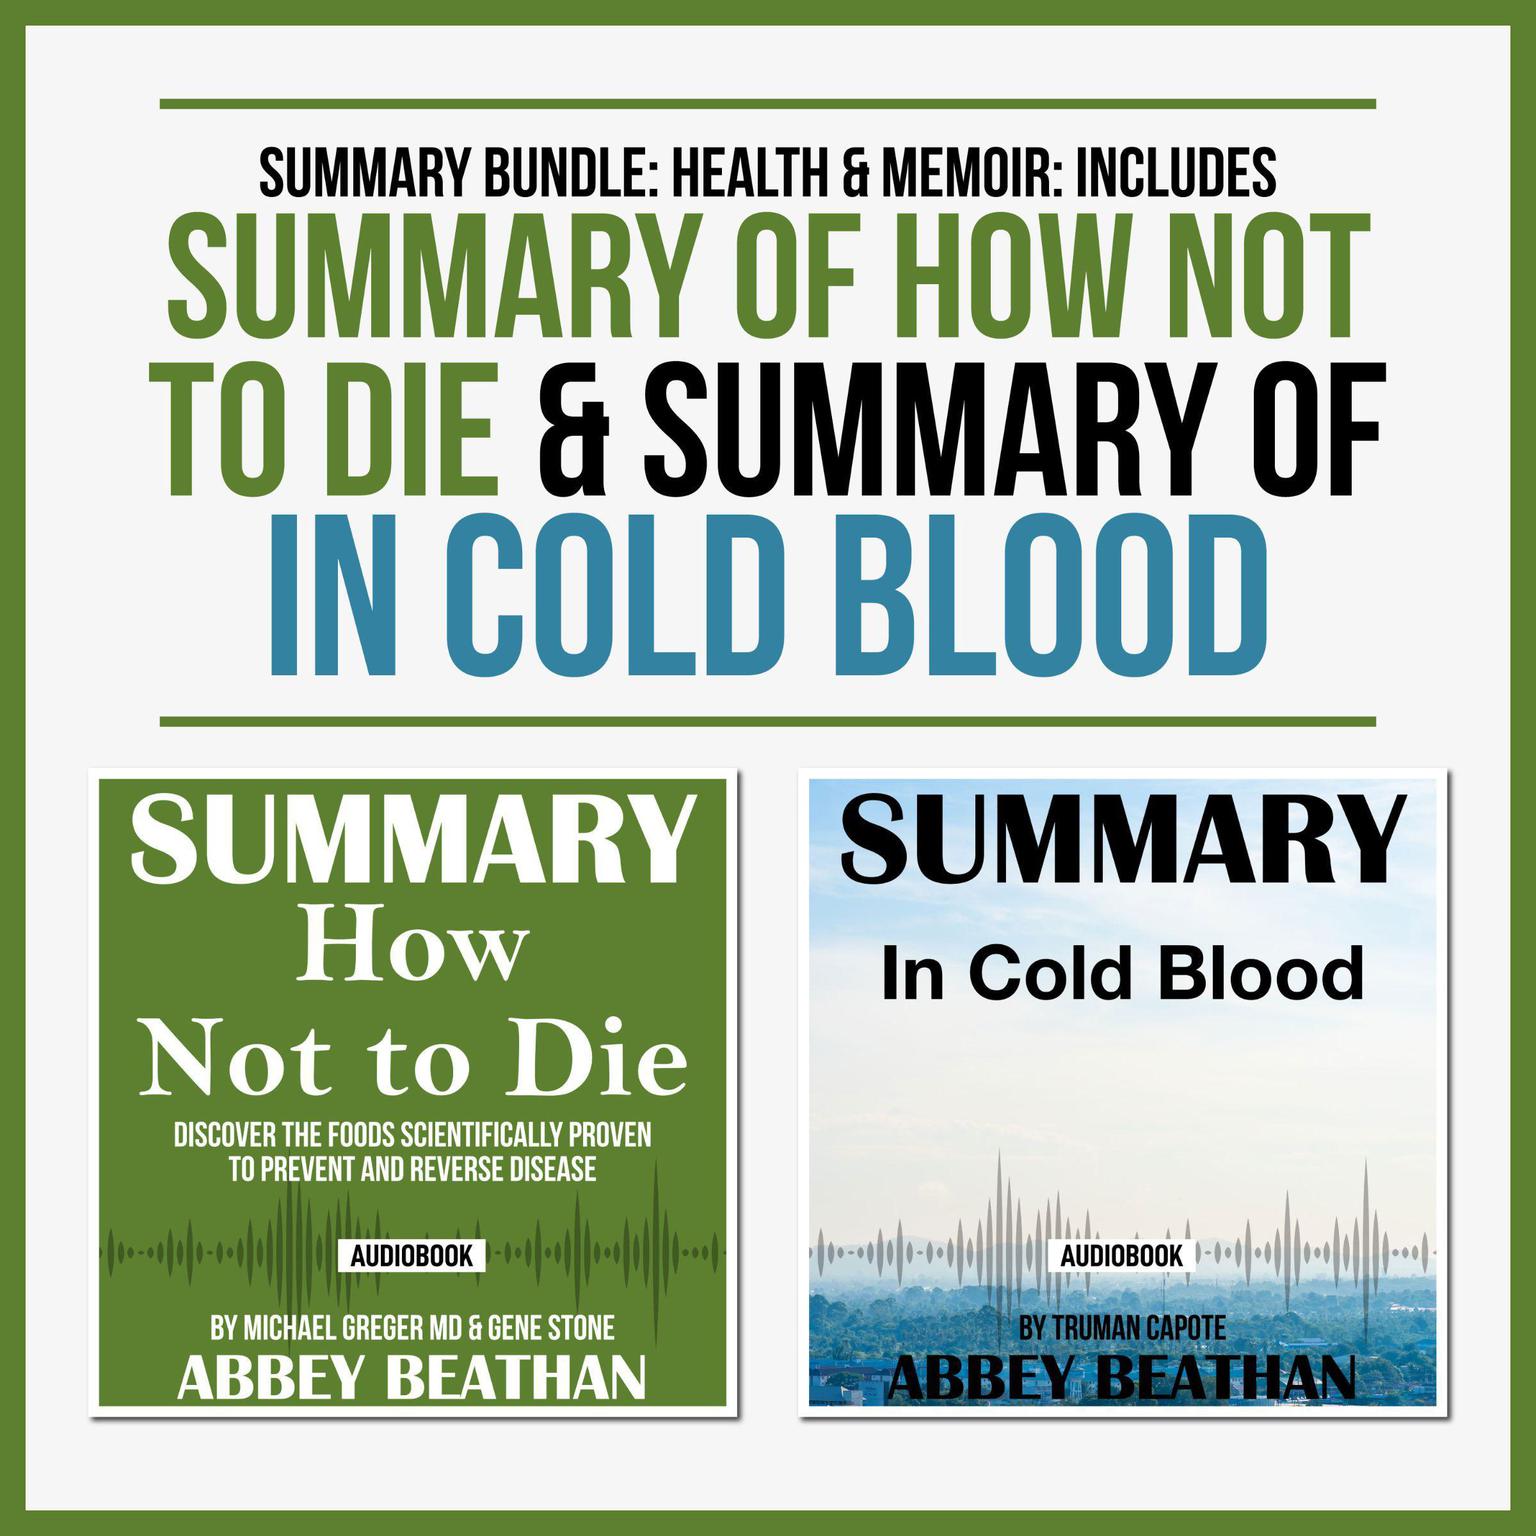 Summary Bundle: Health & Memoir: Includes Summary of How Not to Die & Summary of In Cold Blood Audiobook, by Abbey Beathan